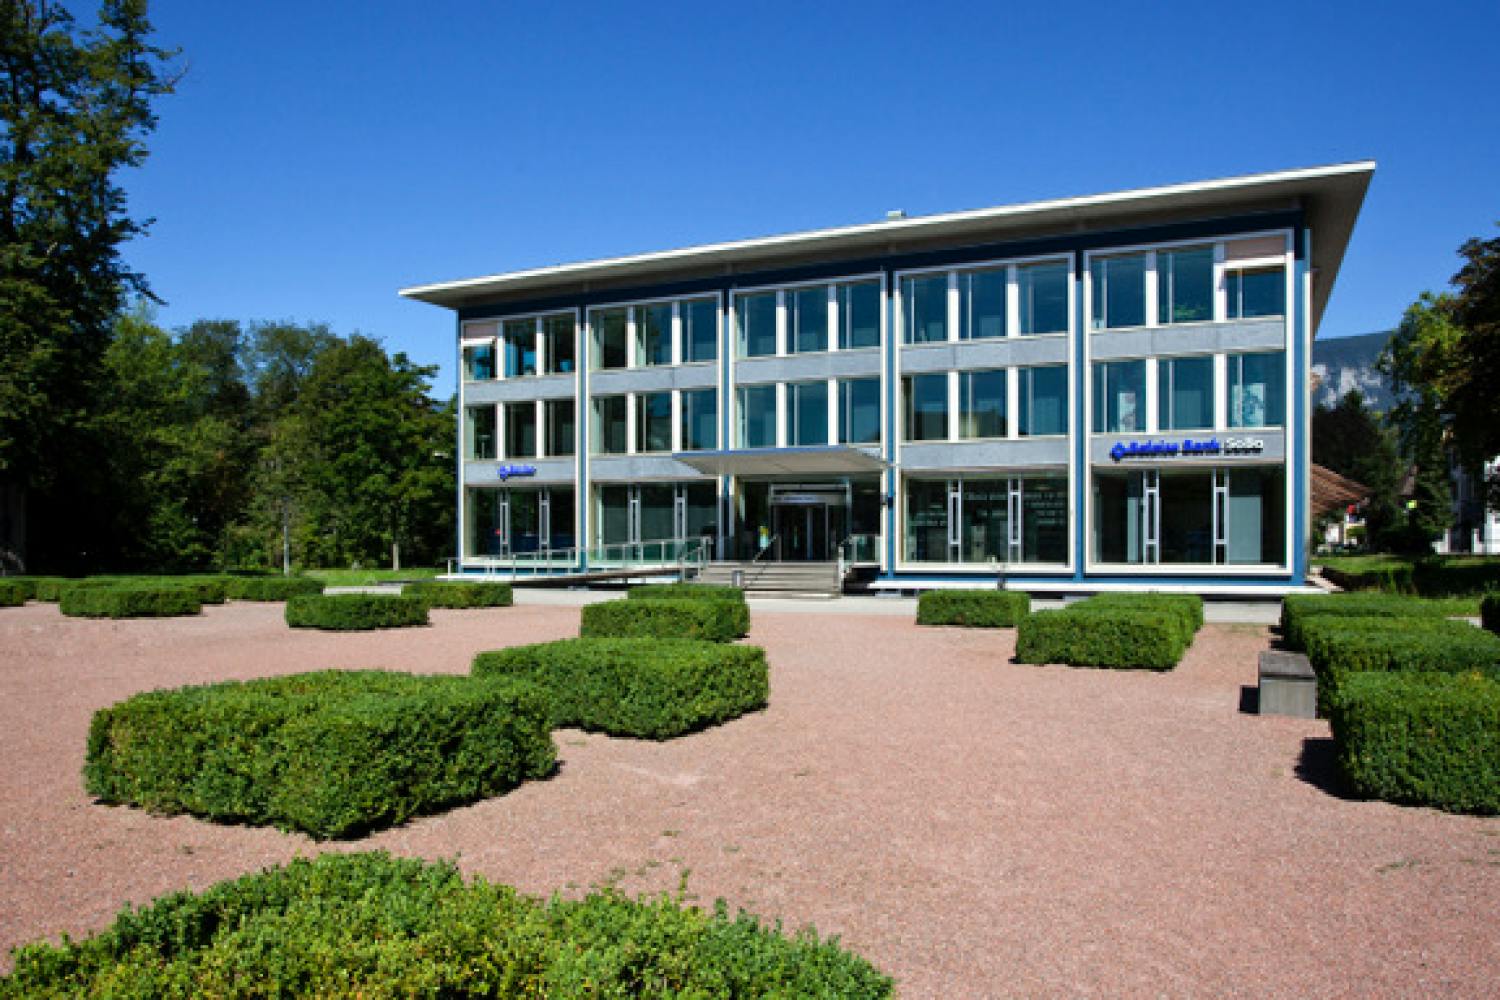 Bank Headquarters of Baloise in Solothurn (Source: Baloise)